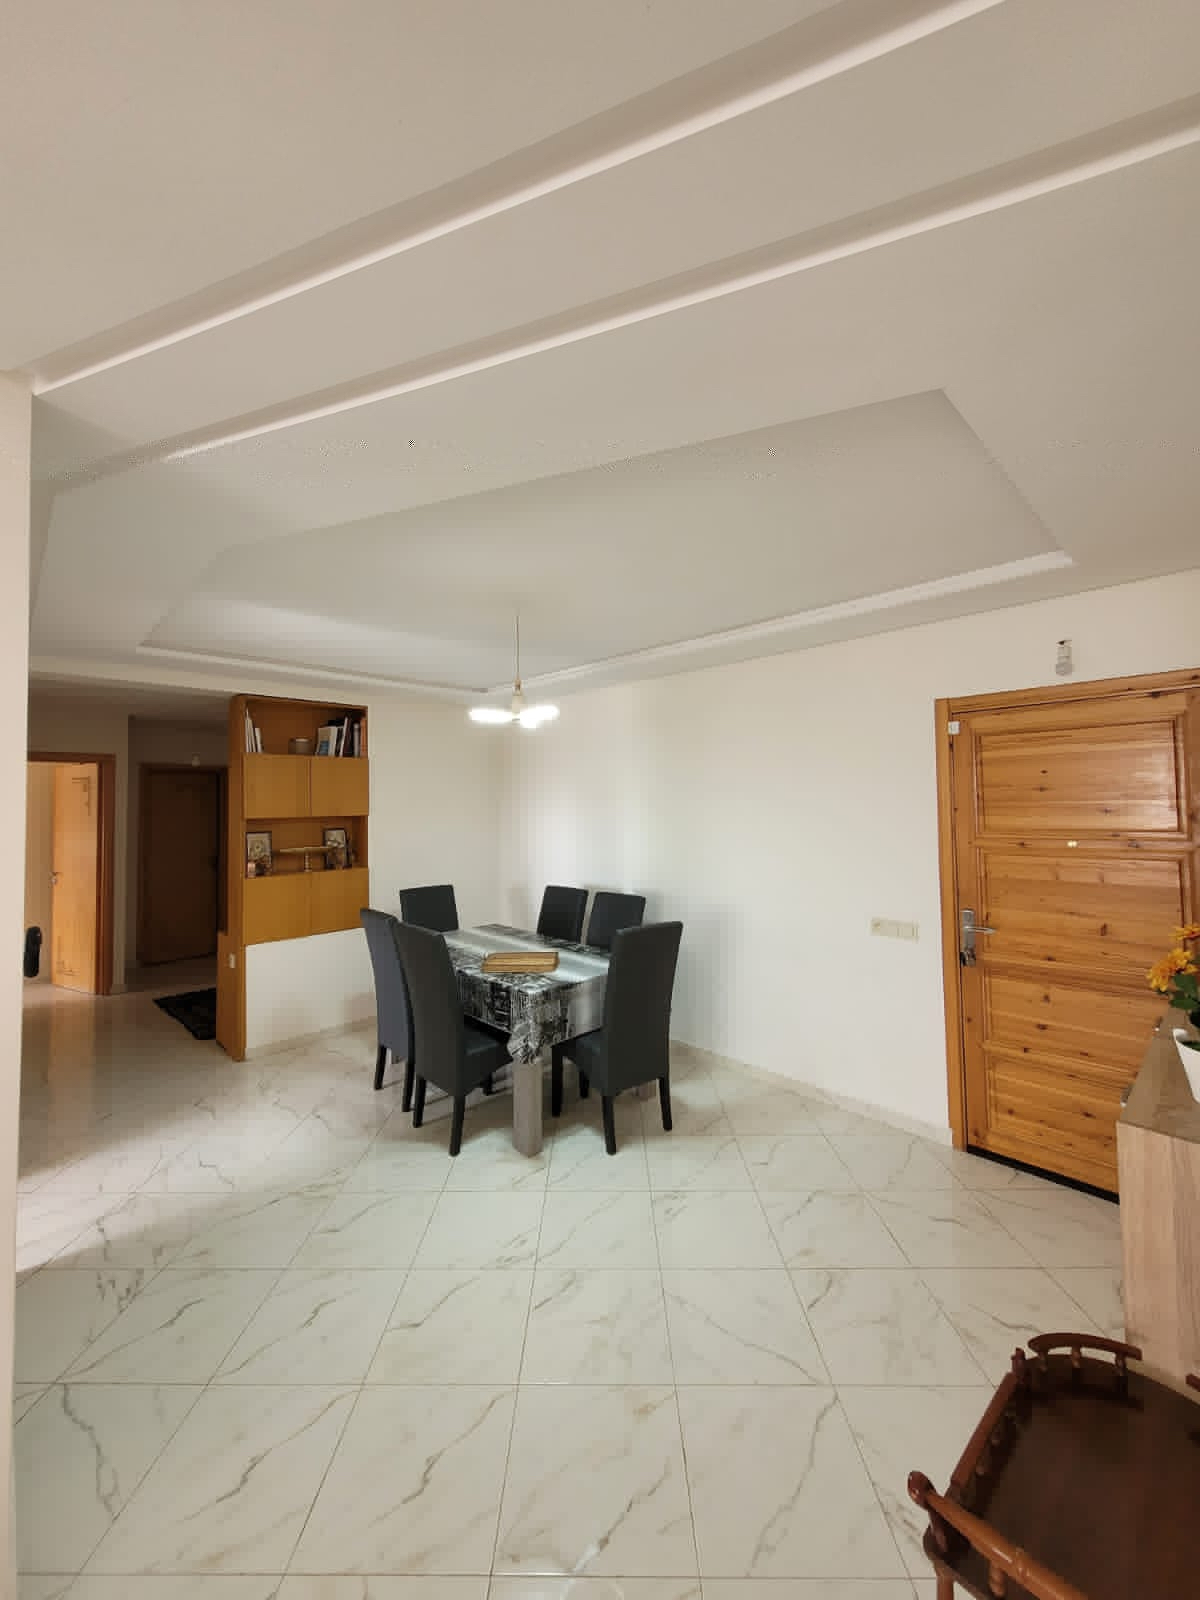 Apartment for Sale 1 300 000 dh 96 sqm, 2 rooms - Harhoura Skhirate- Témara